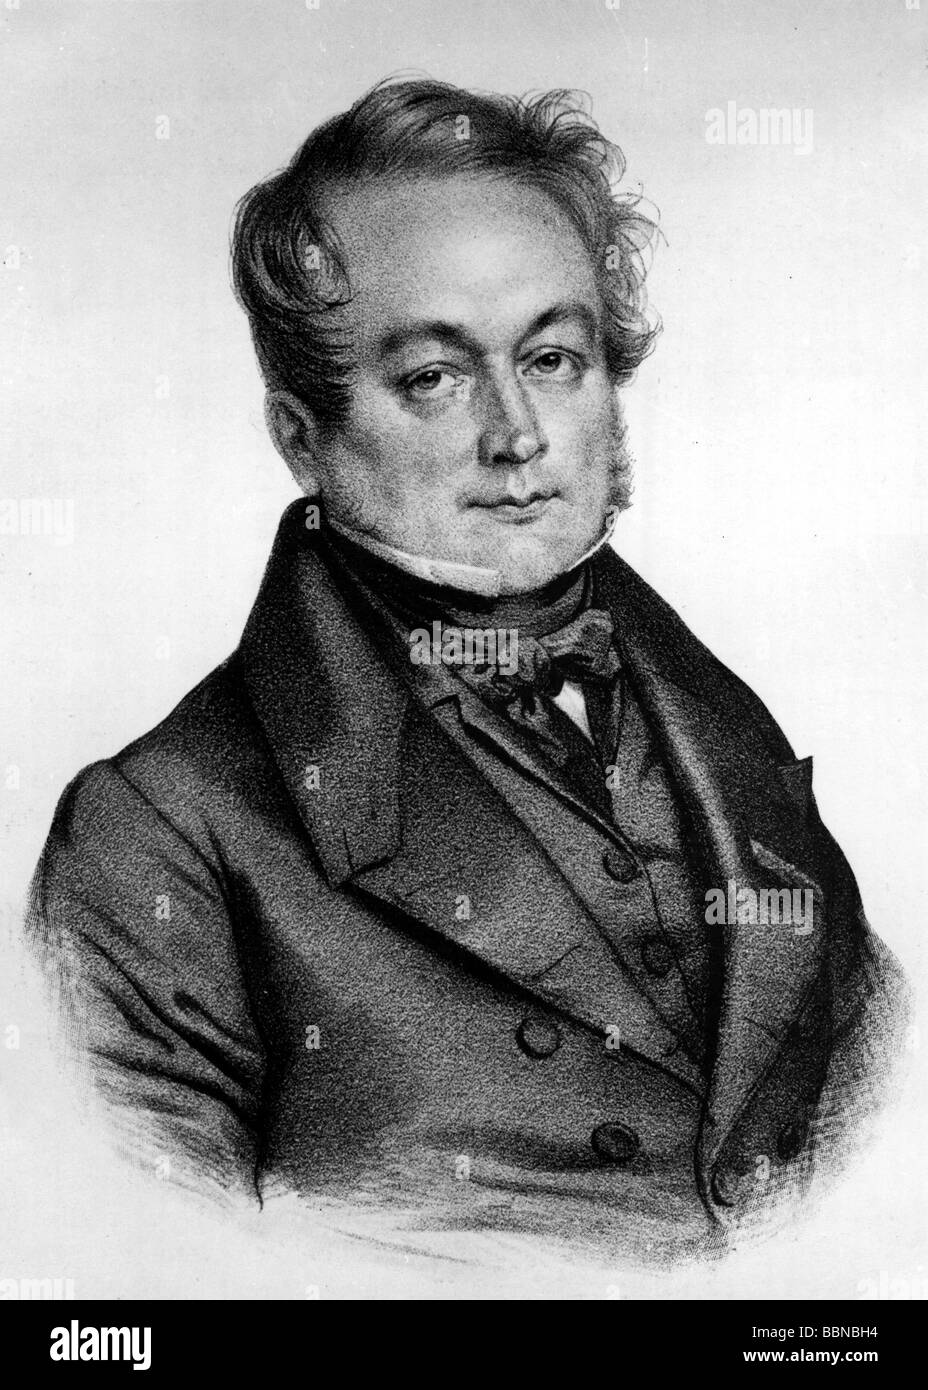 Magendie, Francois, 6.10.1783 - 7.10.1855, French physiologist, portrait, 19th century, , Stock Photo